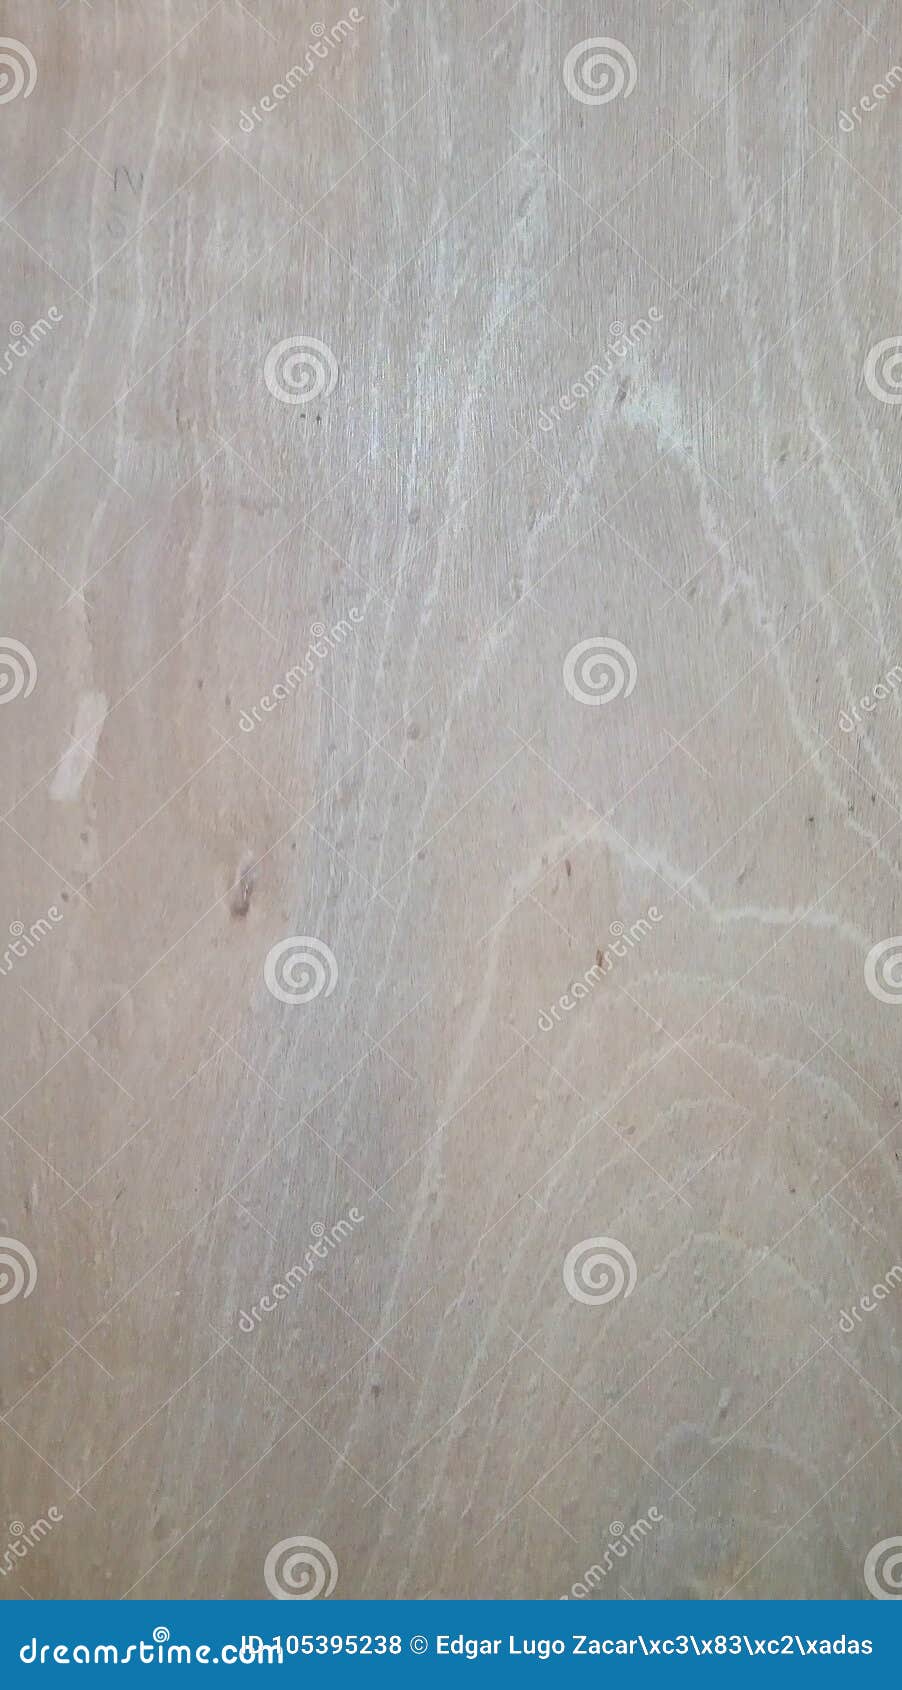 wallpaper with wooden texture